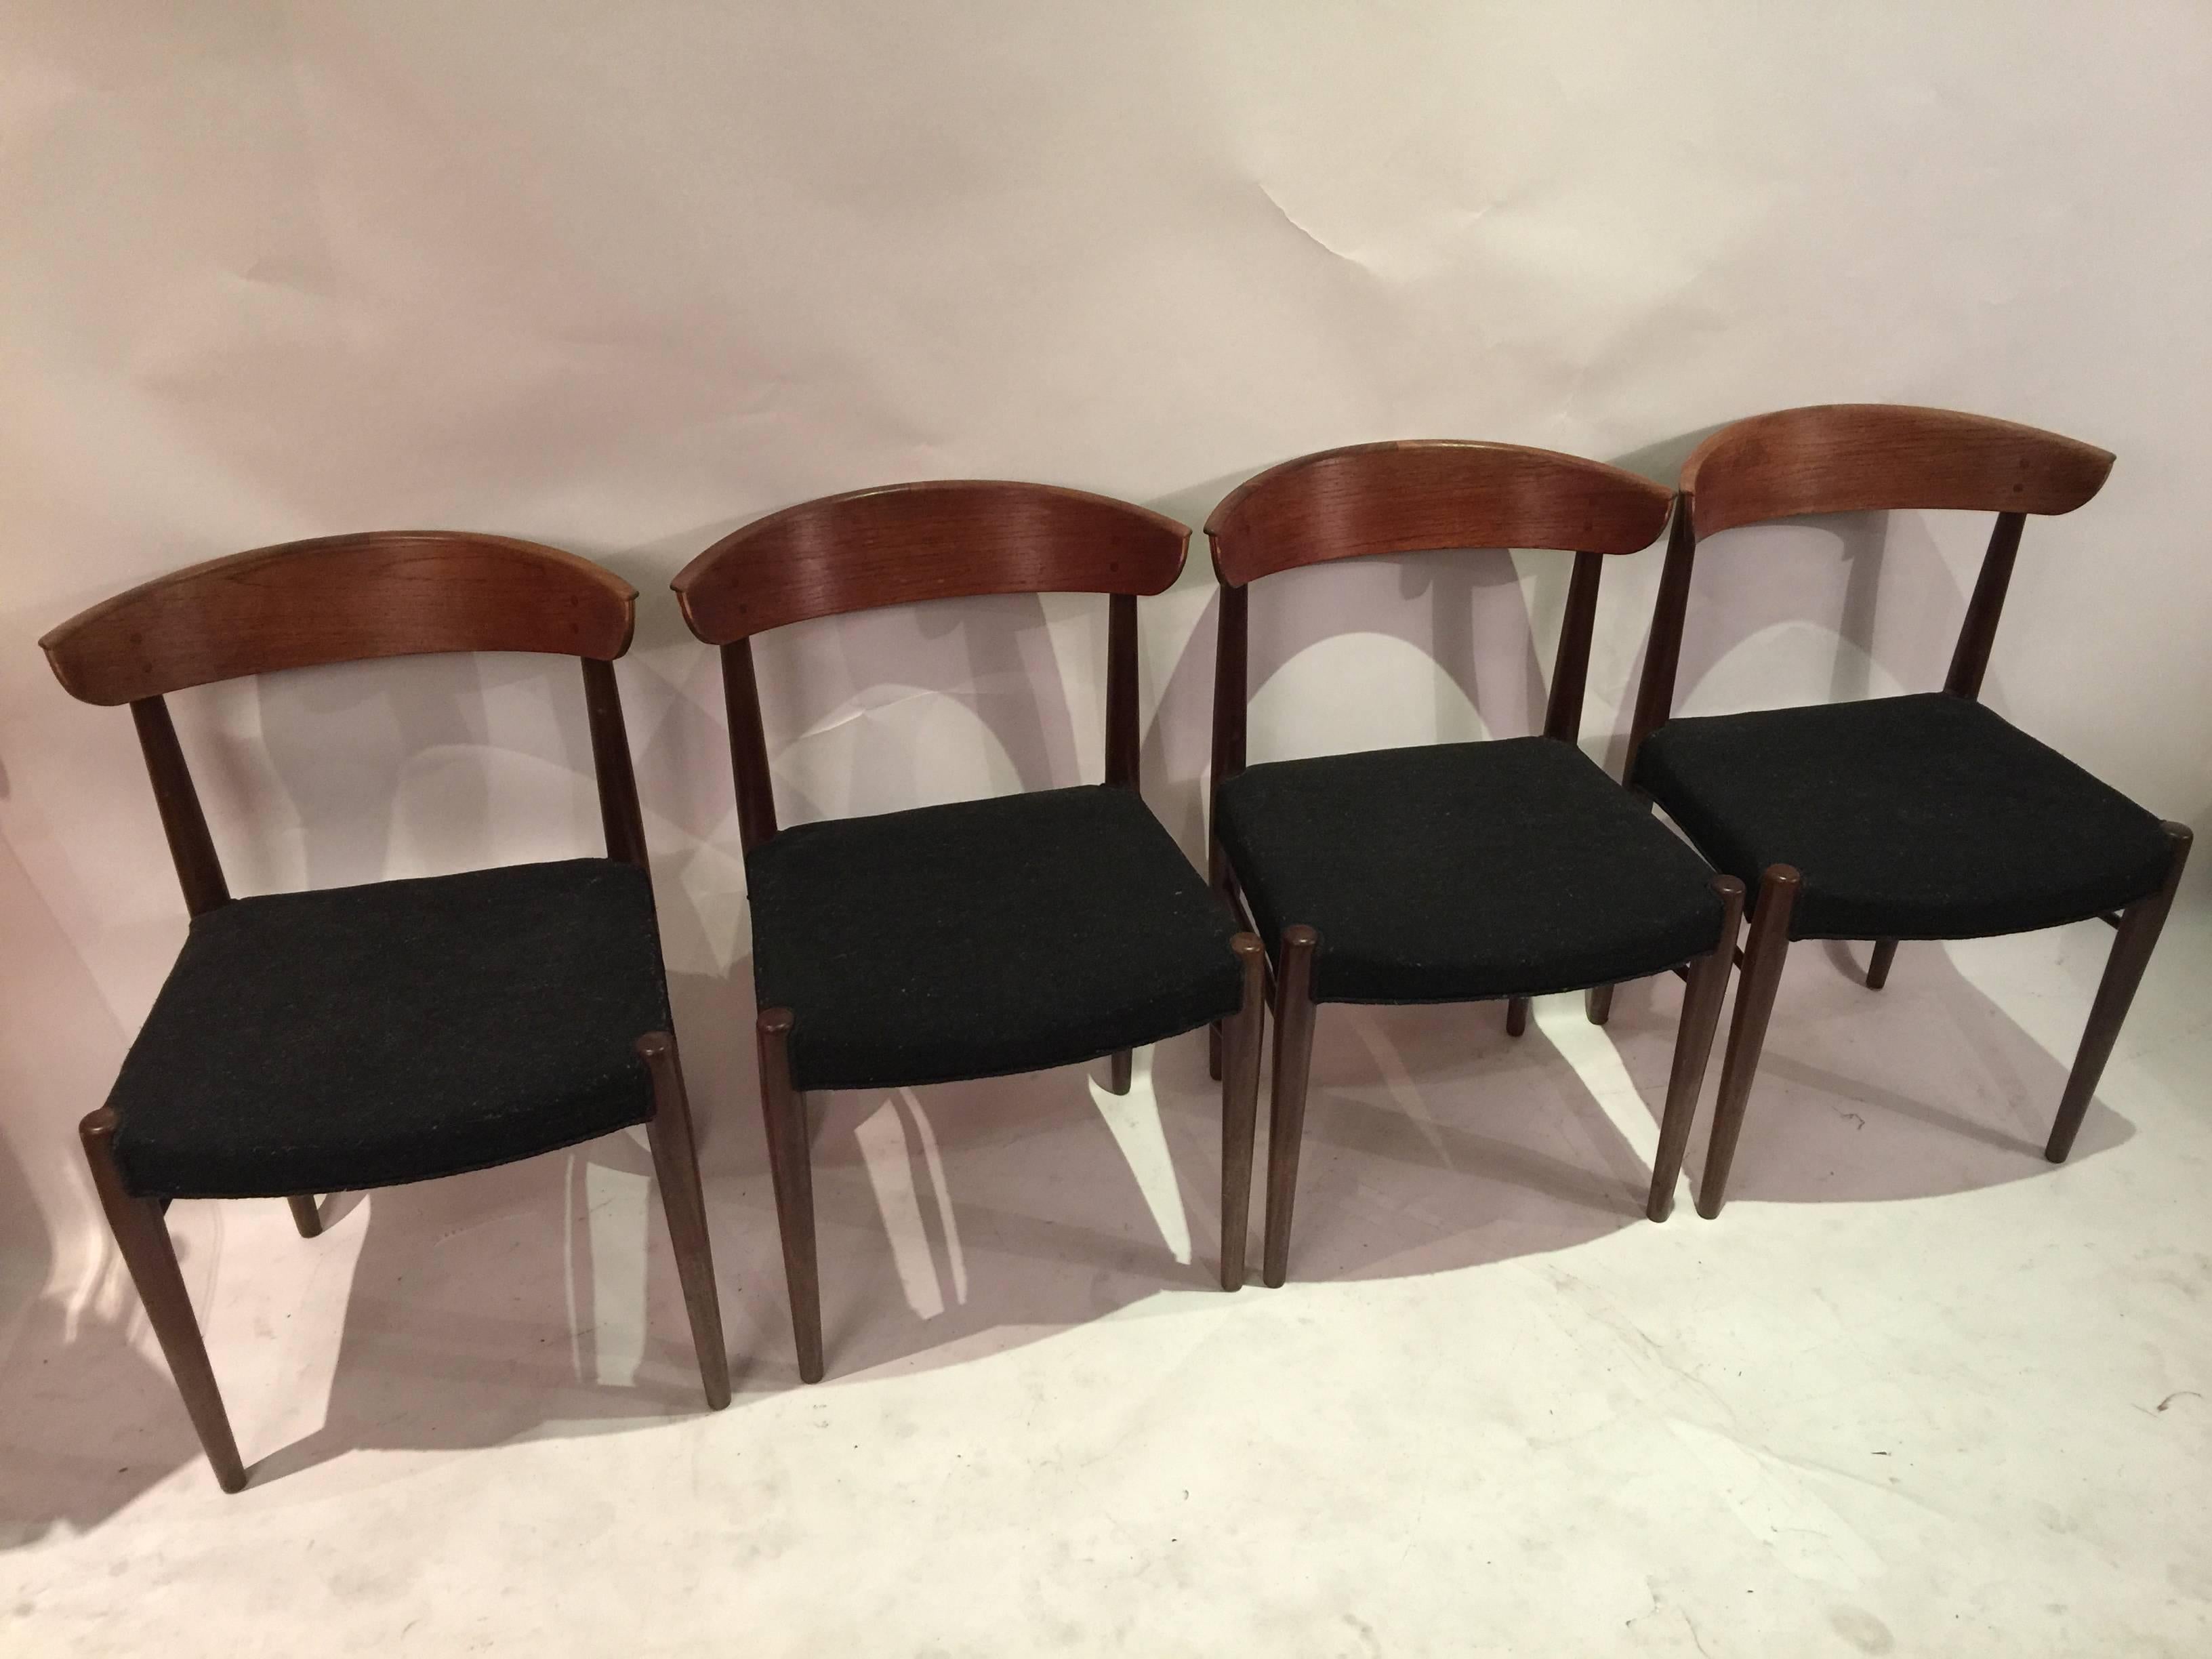 Danish master cabinet maker chairs in textured black fabric. Curved backs are fixed to the frame with peg joints. Scratches and hairline to one chair backrest support. Noticeable wear and tear to edges and corner.
Contact us for refinishing and